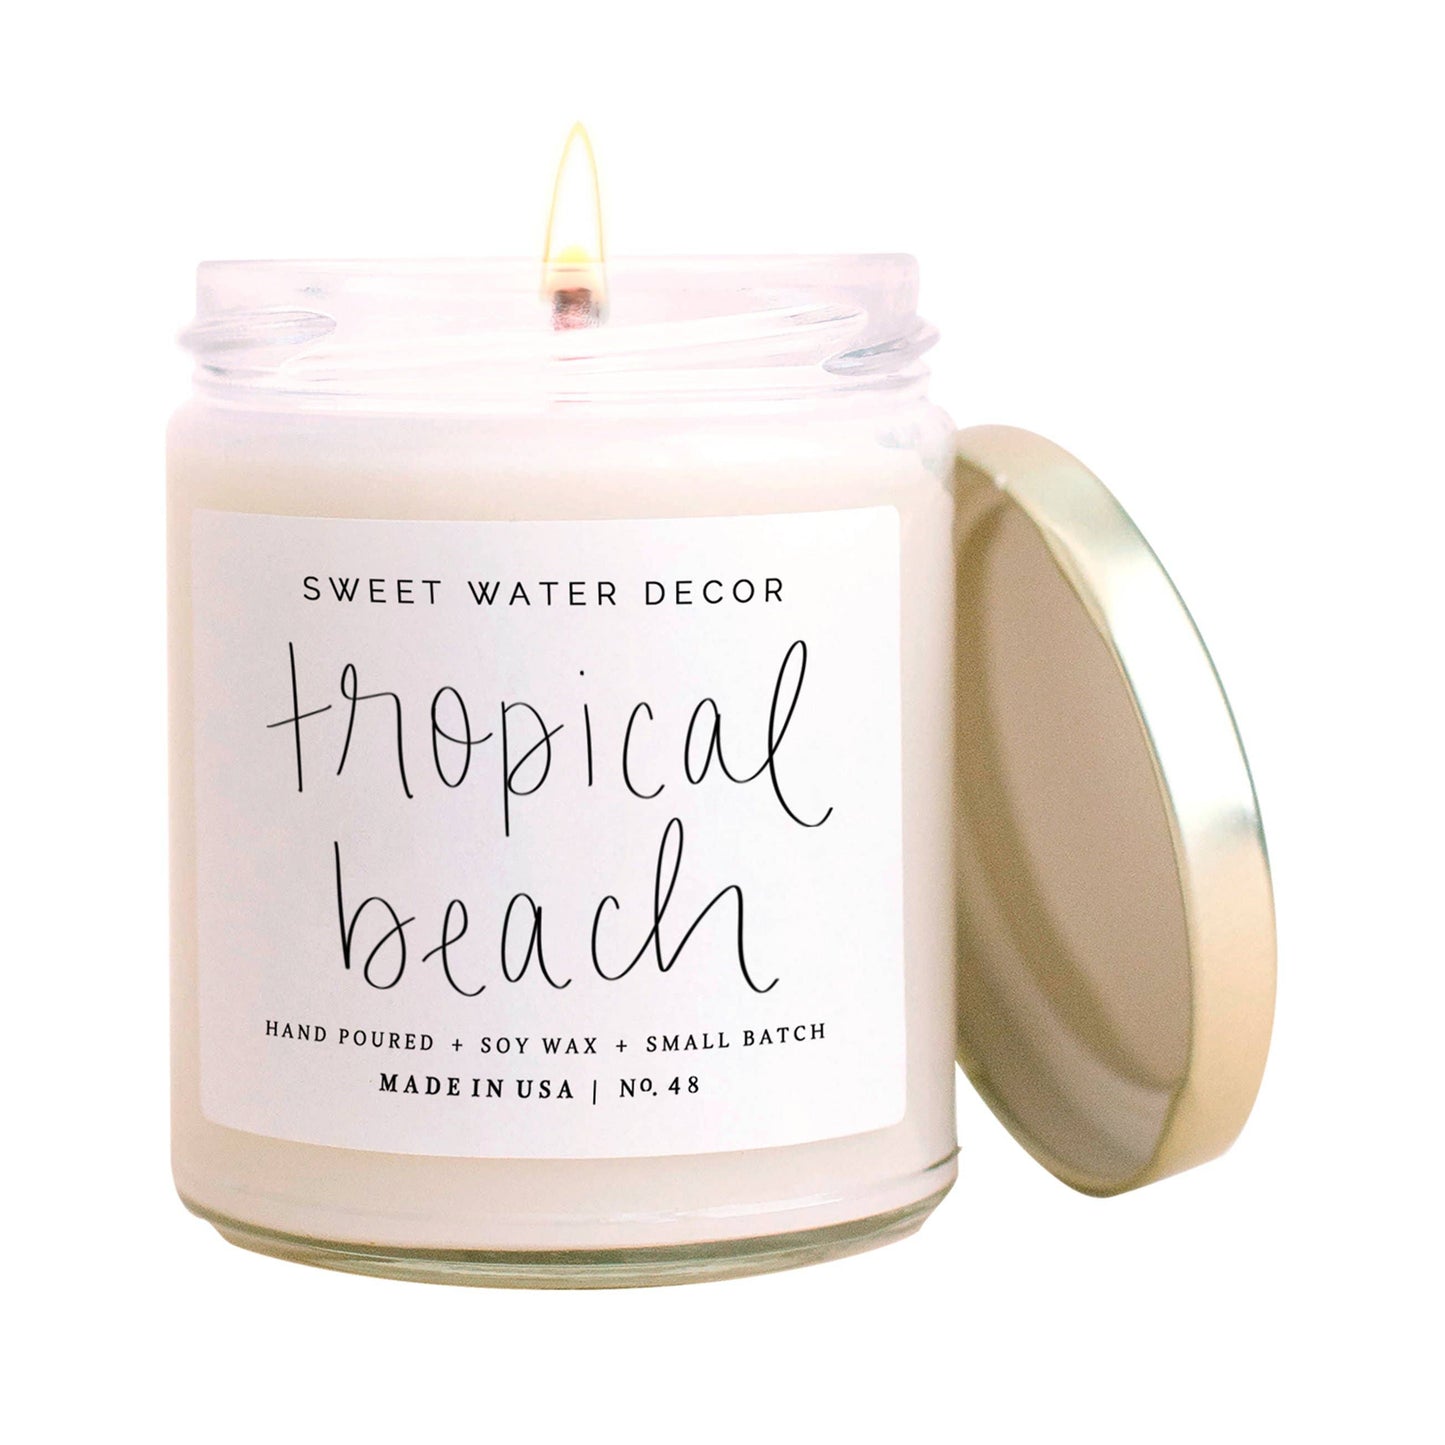 Sweet Water Decor - Tropical Beach Soy Candle